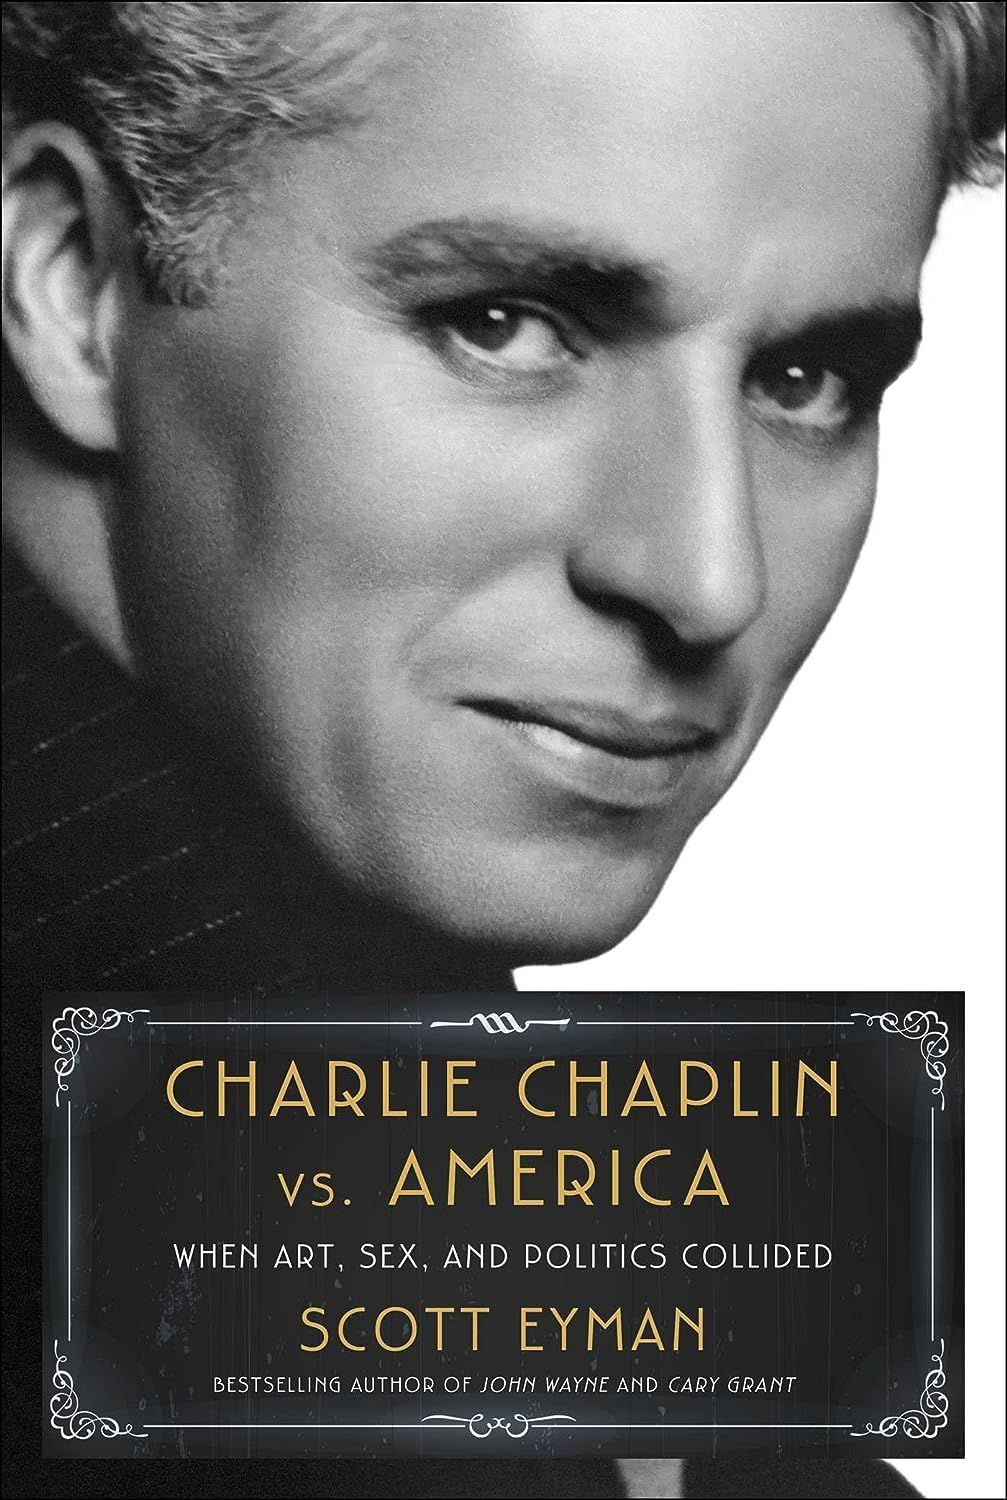 A Man Without a Country: On Scott Eyman’s “Charlie Chaplin vs. America”